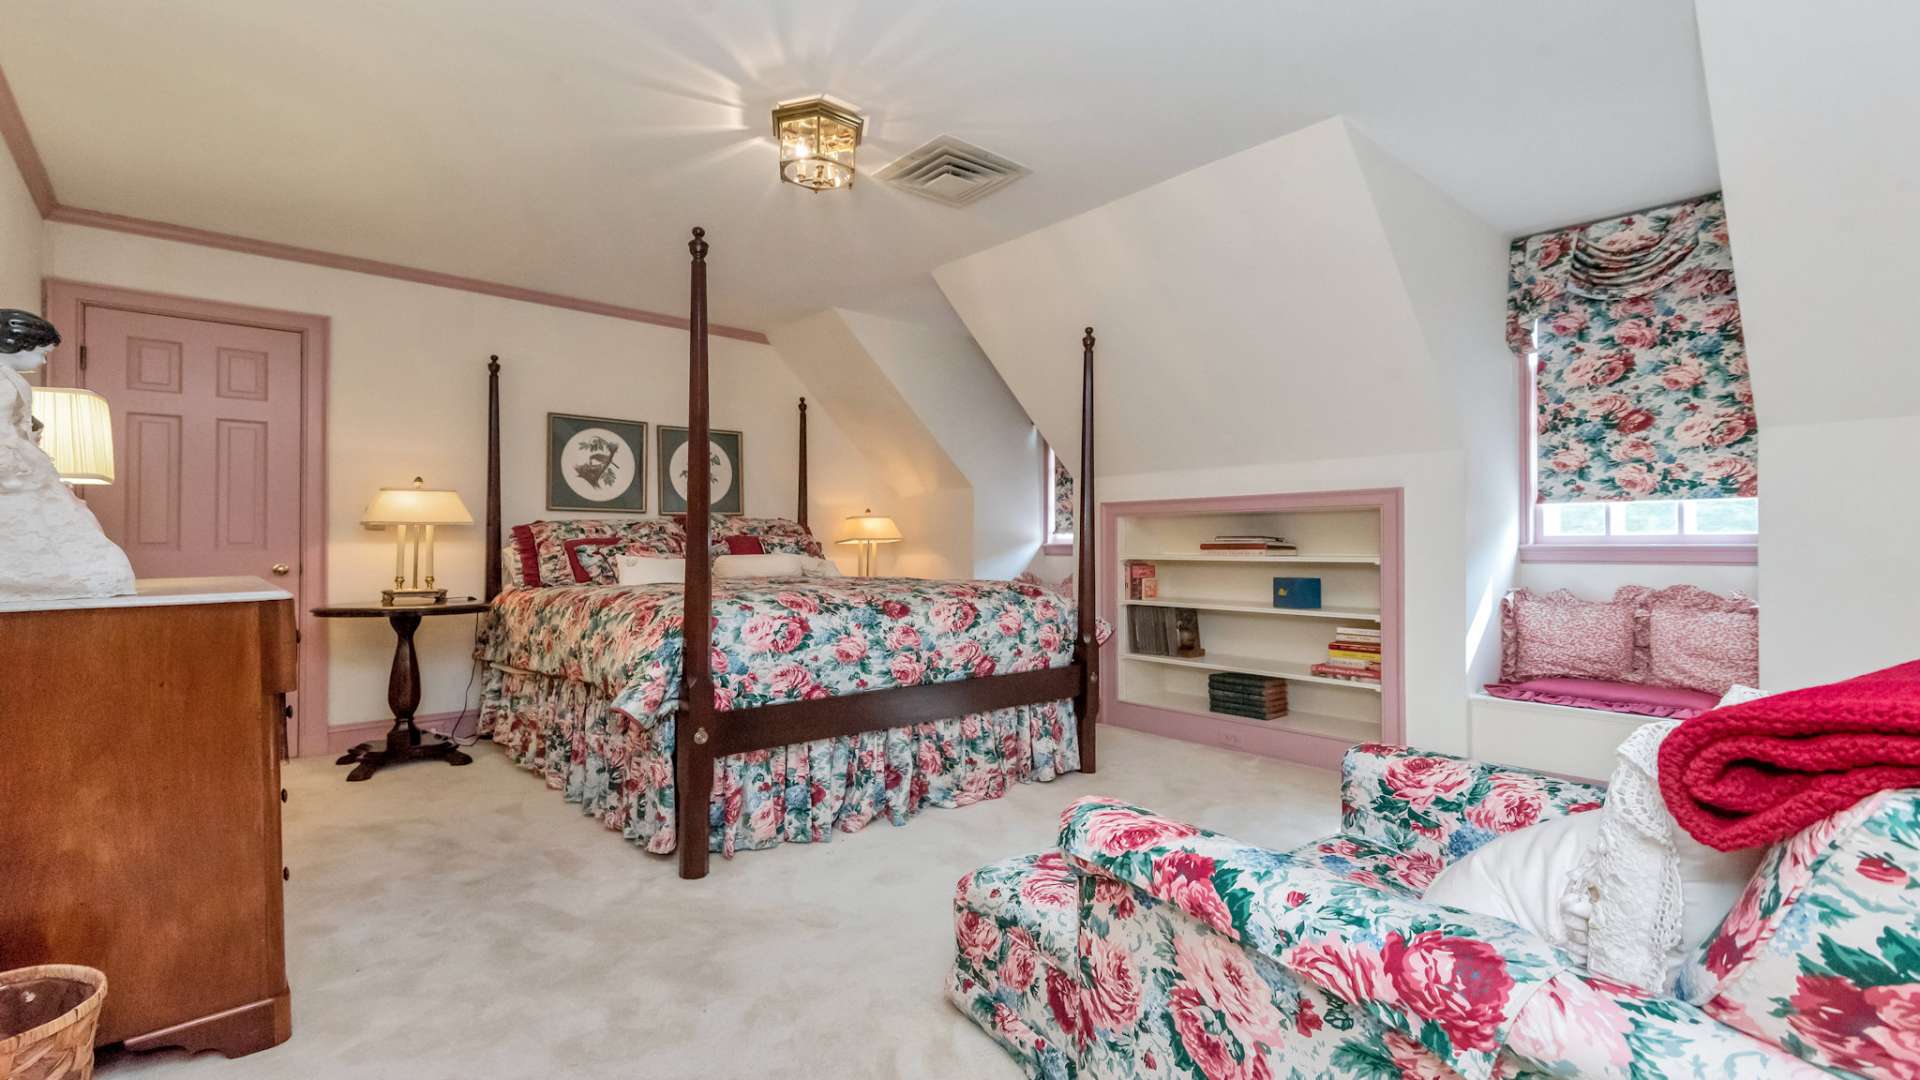 This spacious upper level bedroom features window seats with storage, and shares a Jack and Jill bathroom with the second upper level bedroom.